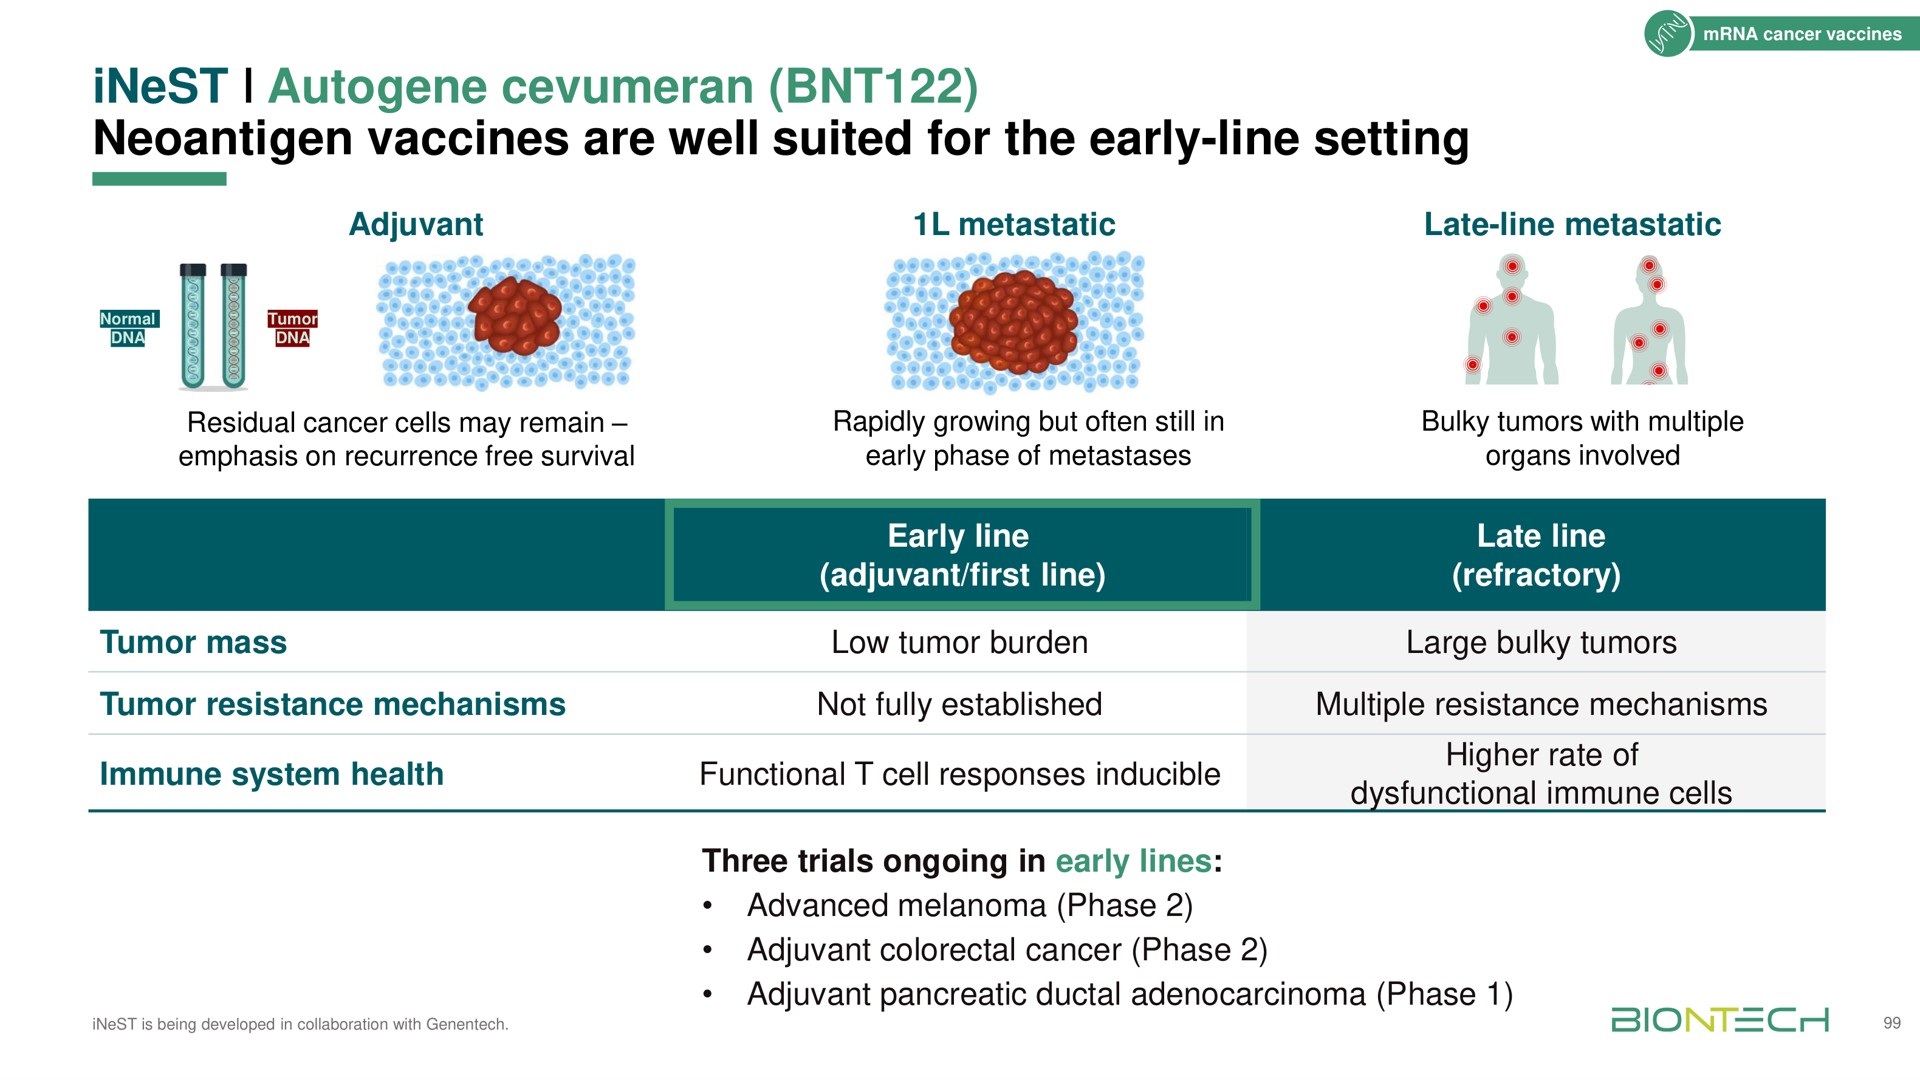 vaccines are well suited for the early line setting | BioNTech